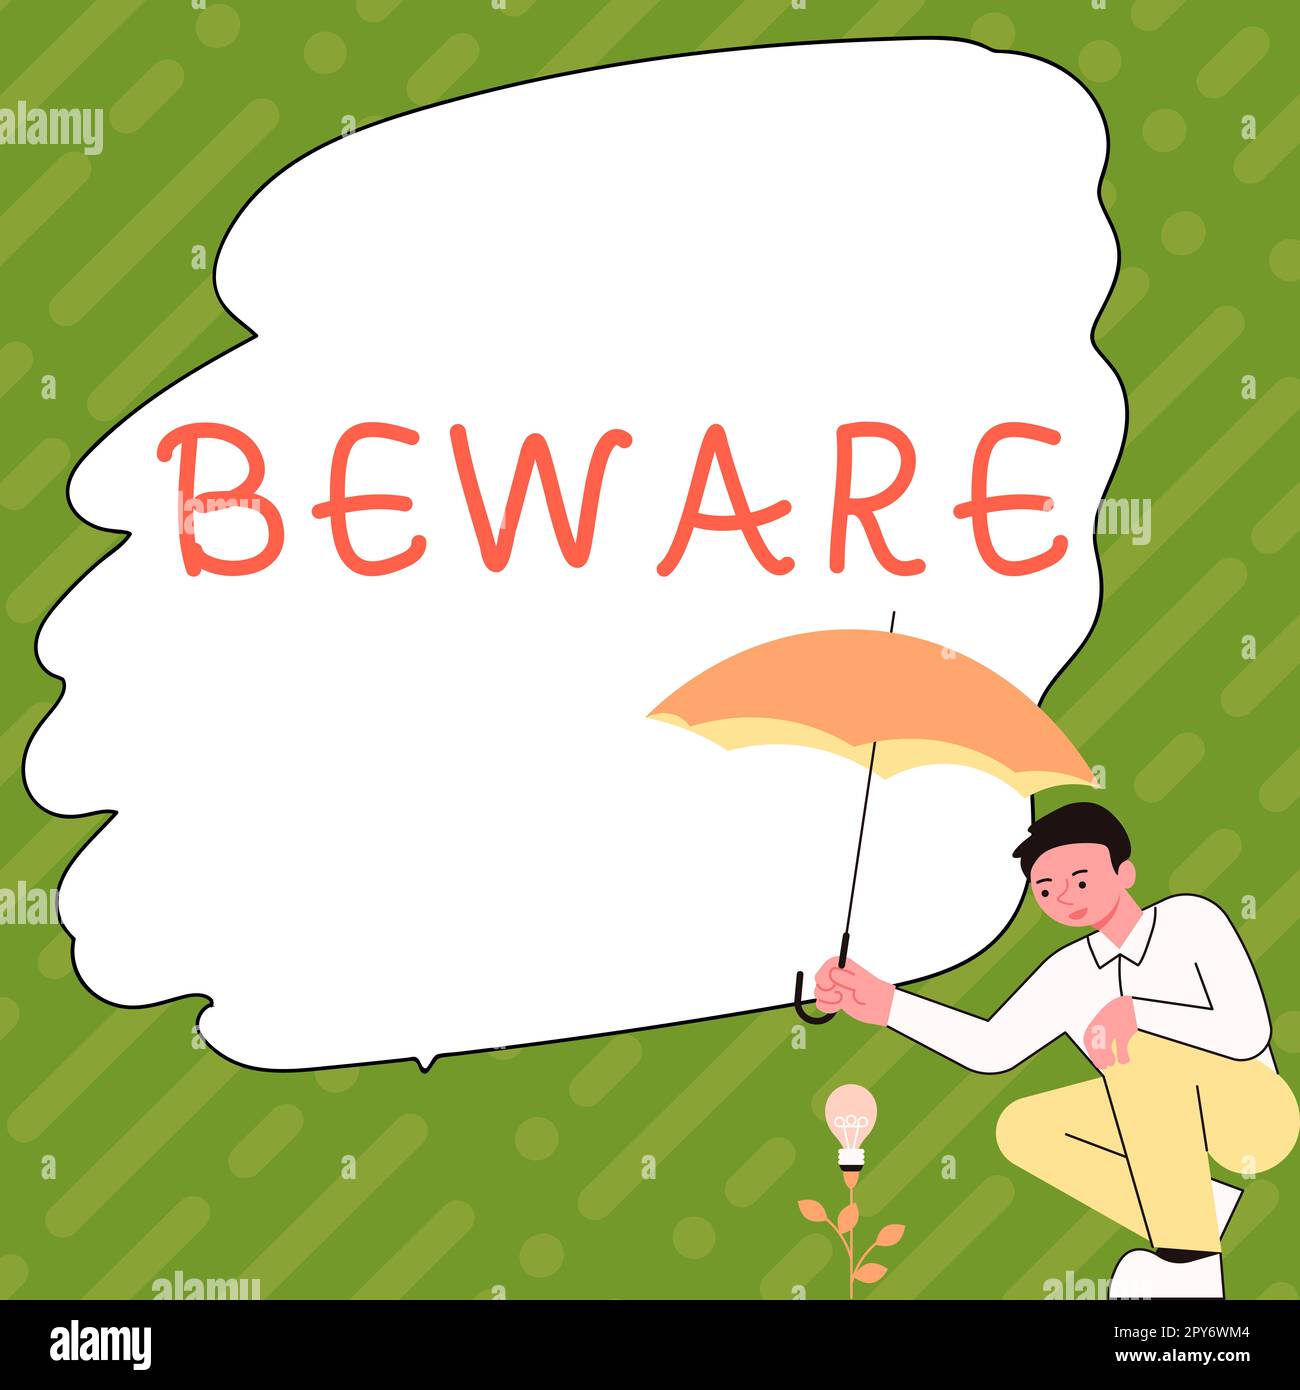 Sign displaying Beware. Word for used to warn someone to be very careful about something or someone Stock Photo